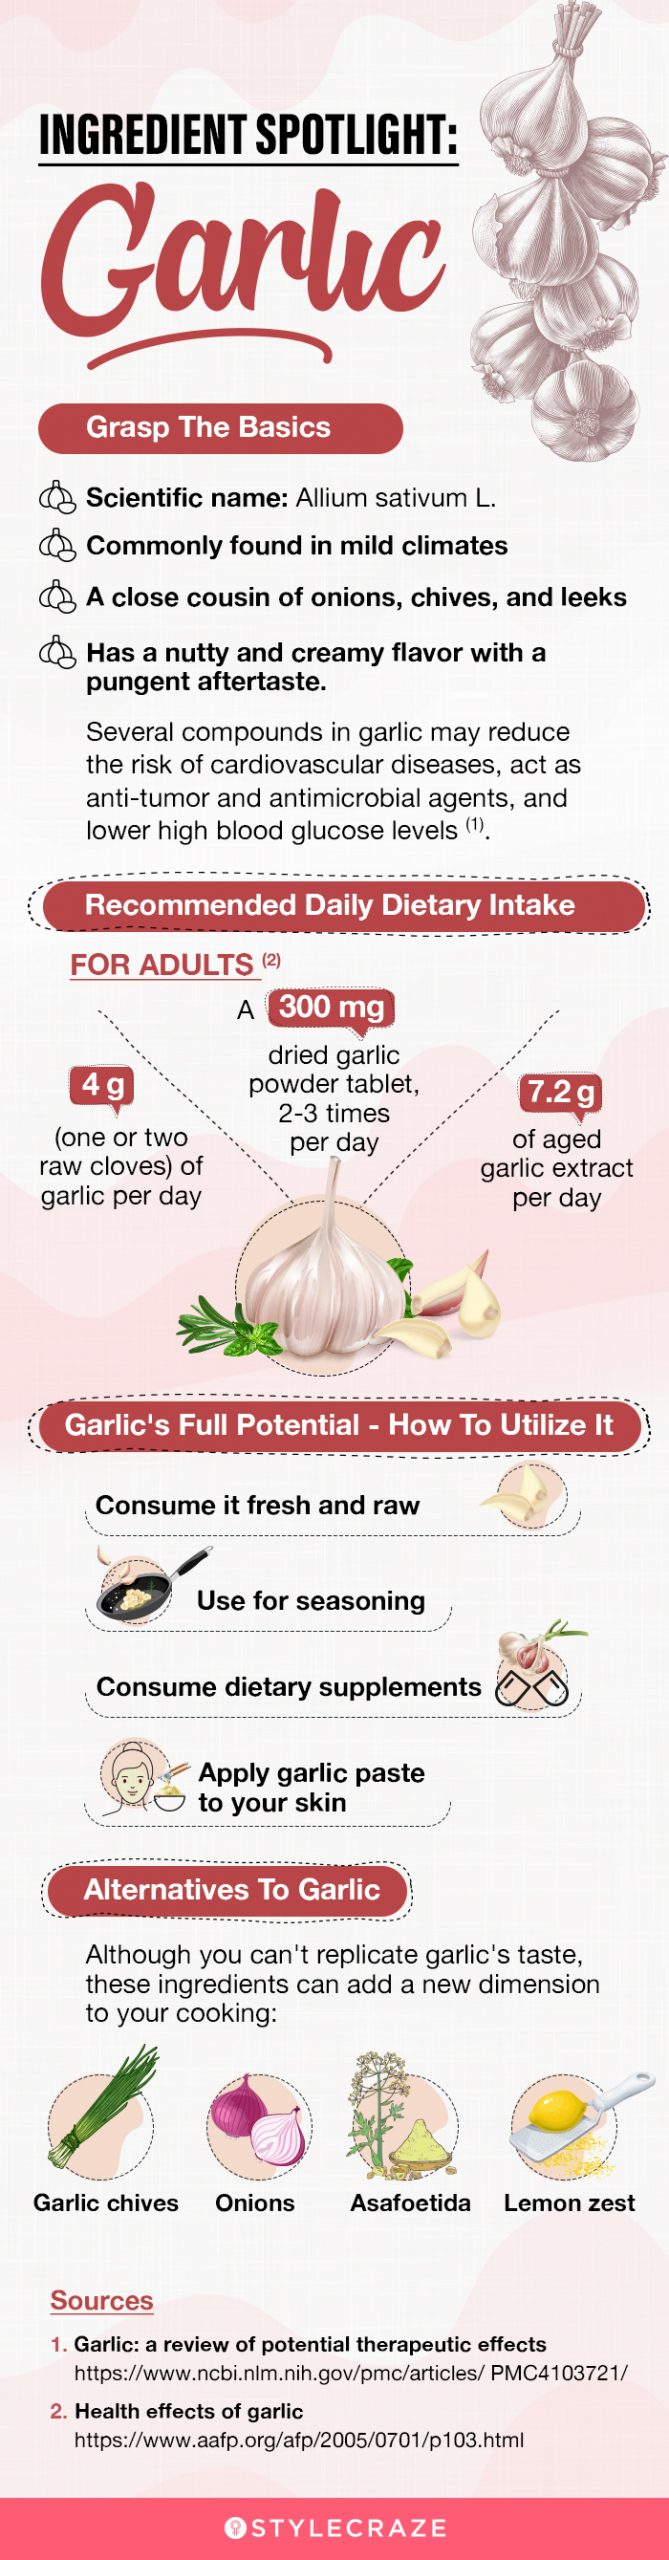 unknown facts about garlic [infographic]